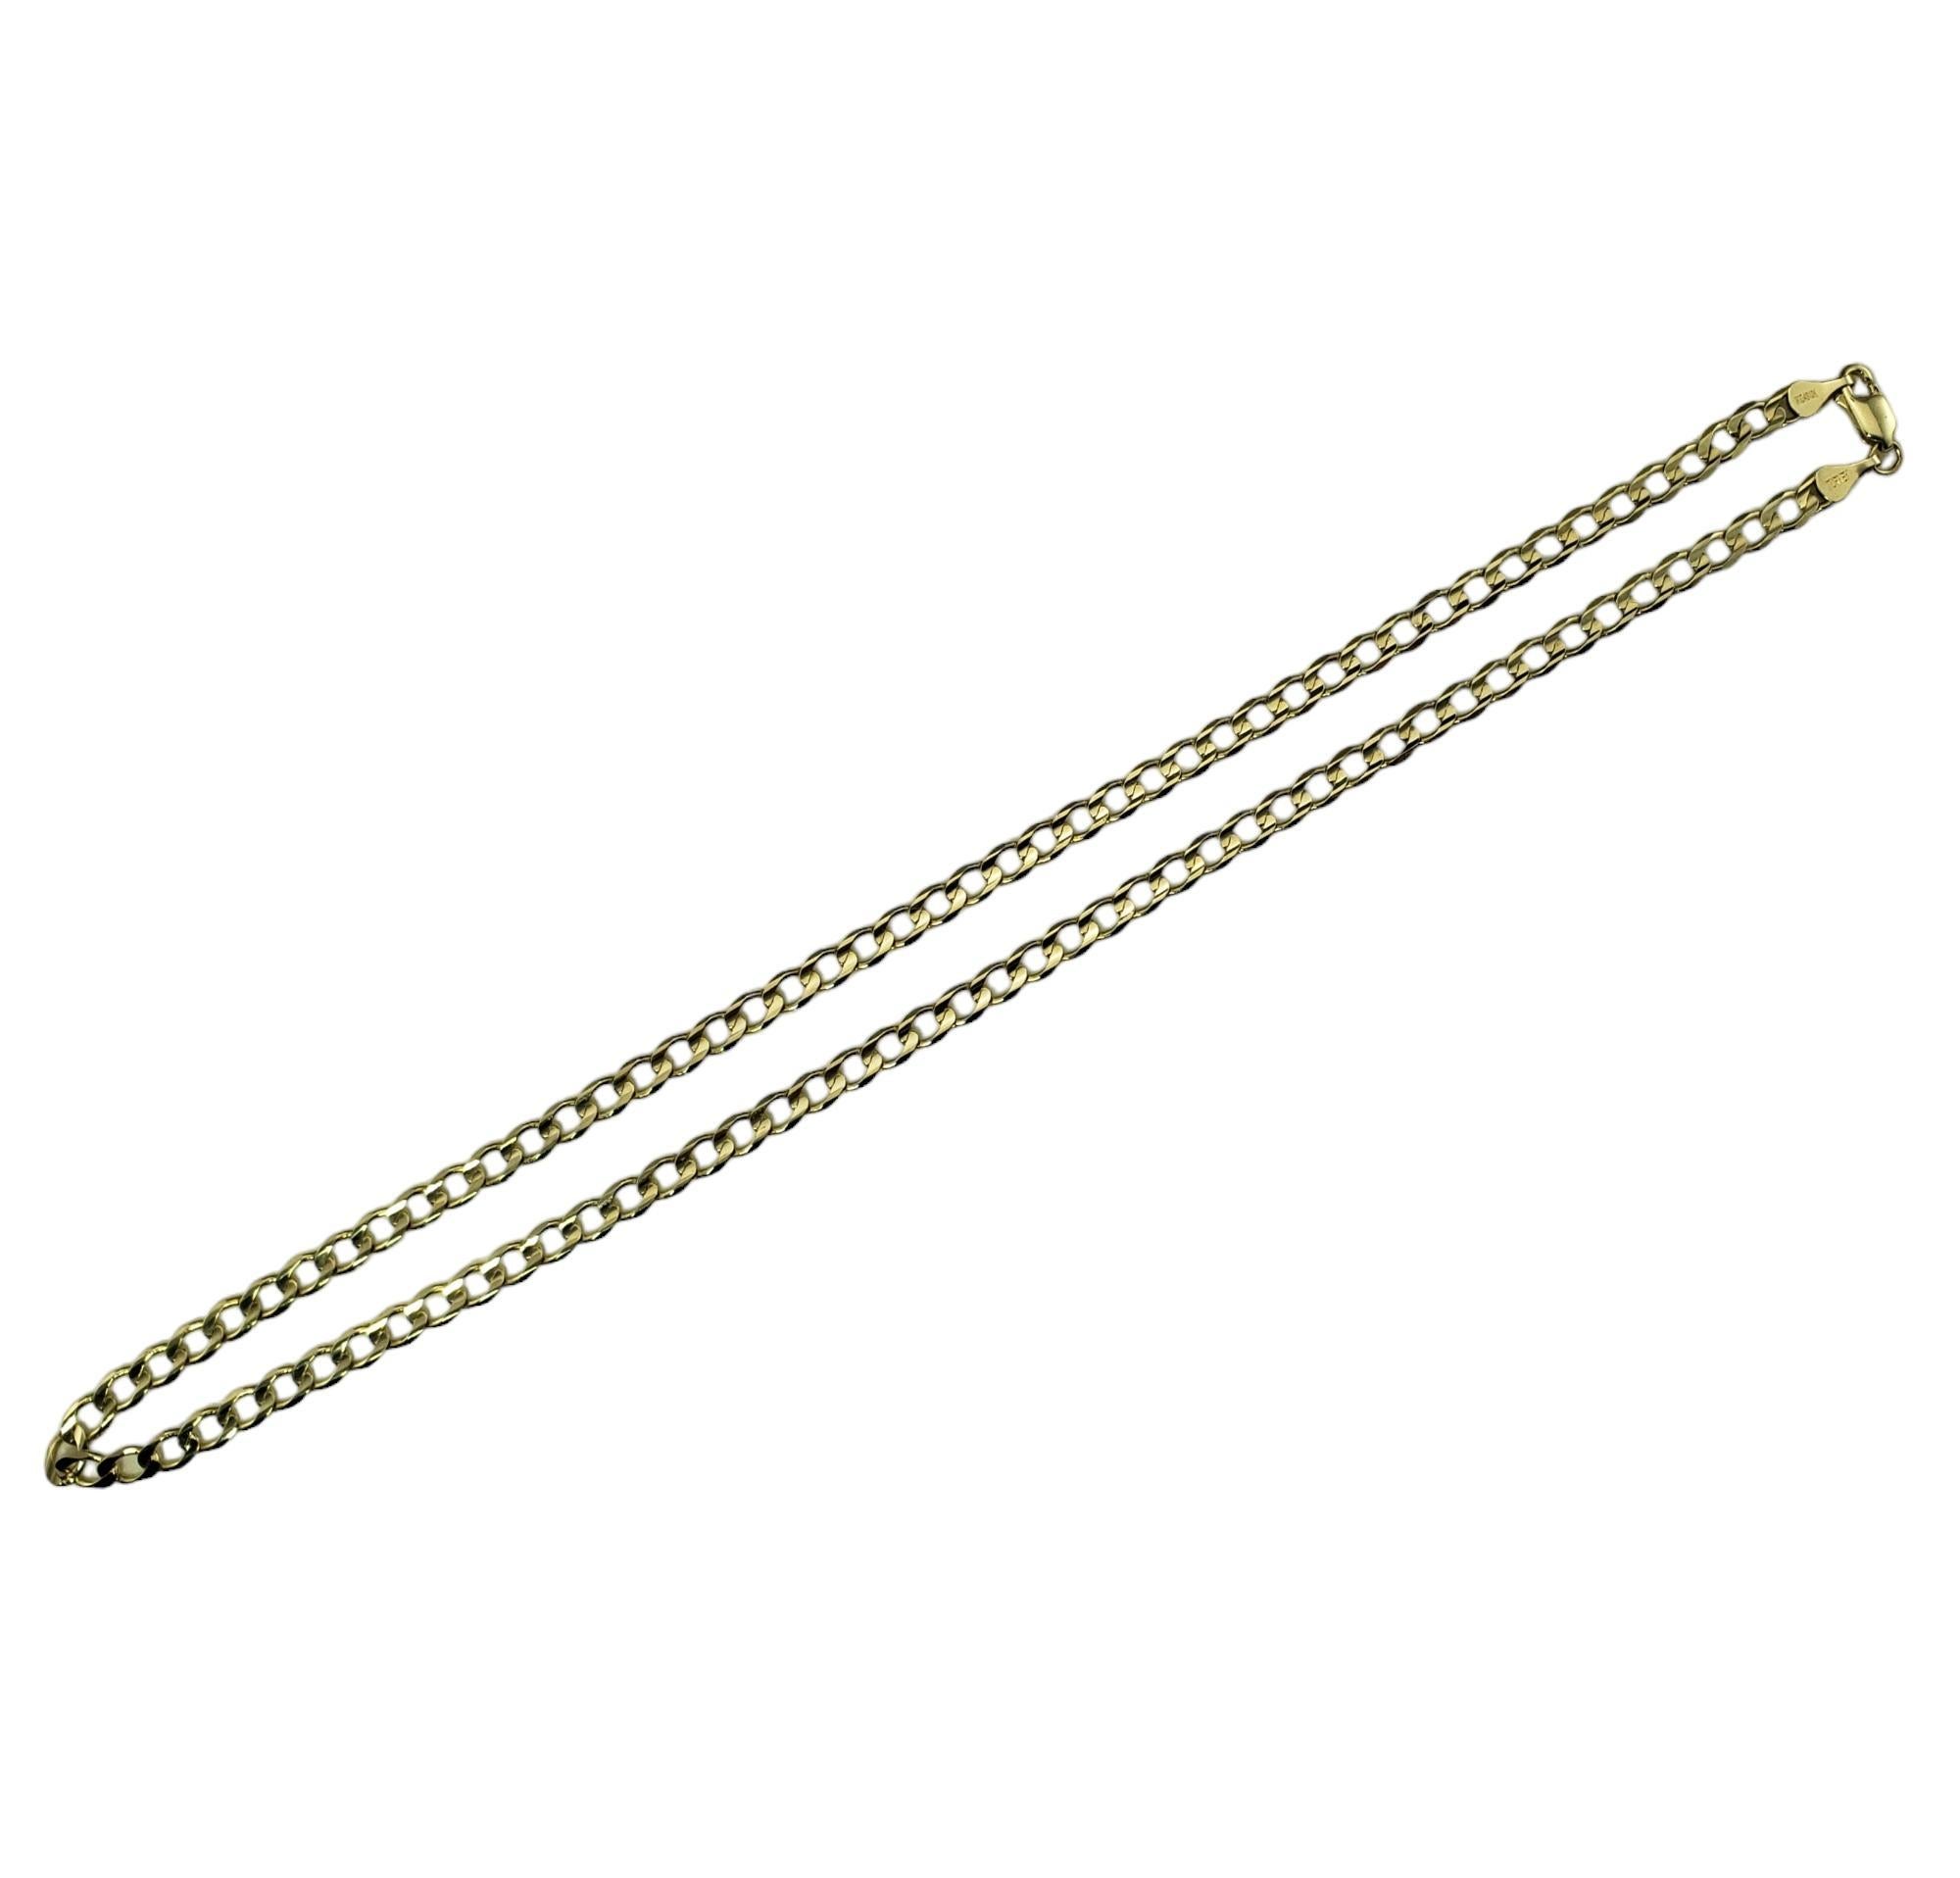 Women's or Men's Vintage 10 Karat Yellow Gold Curb Chain Necklace #15329 For Sale